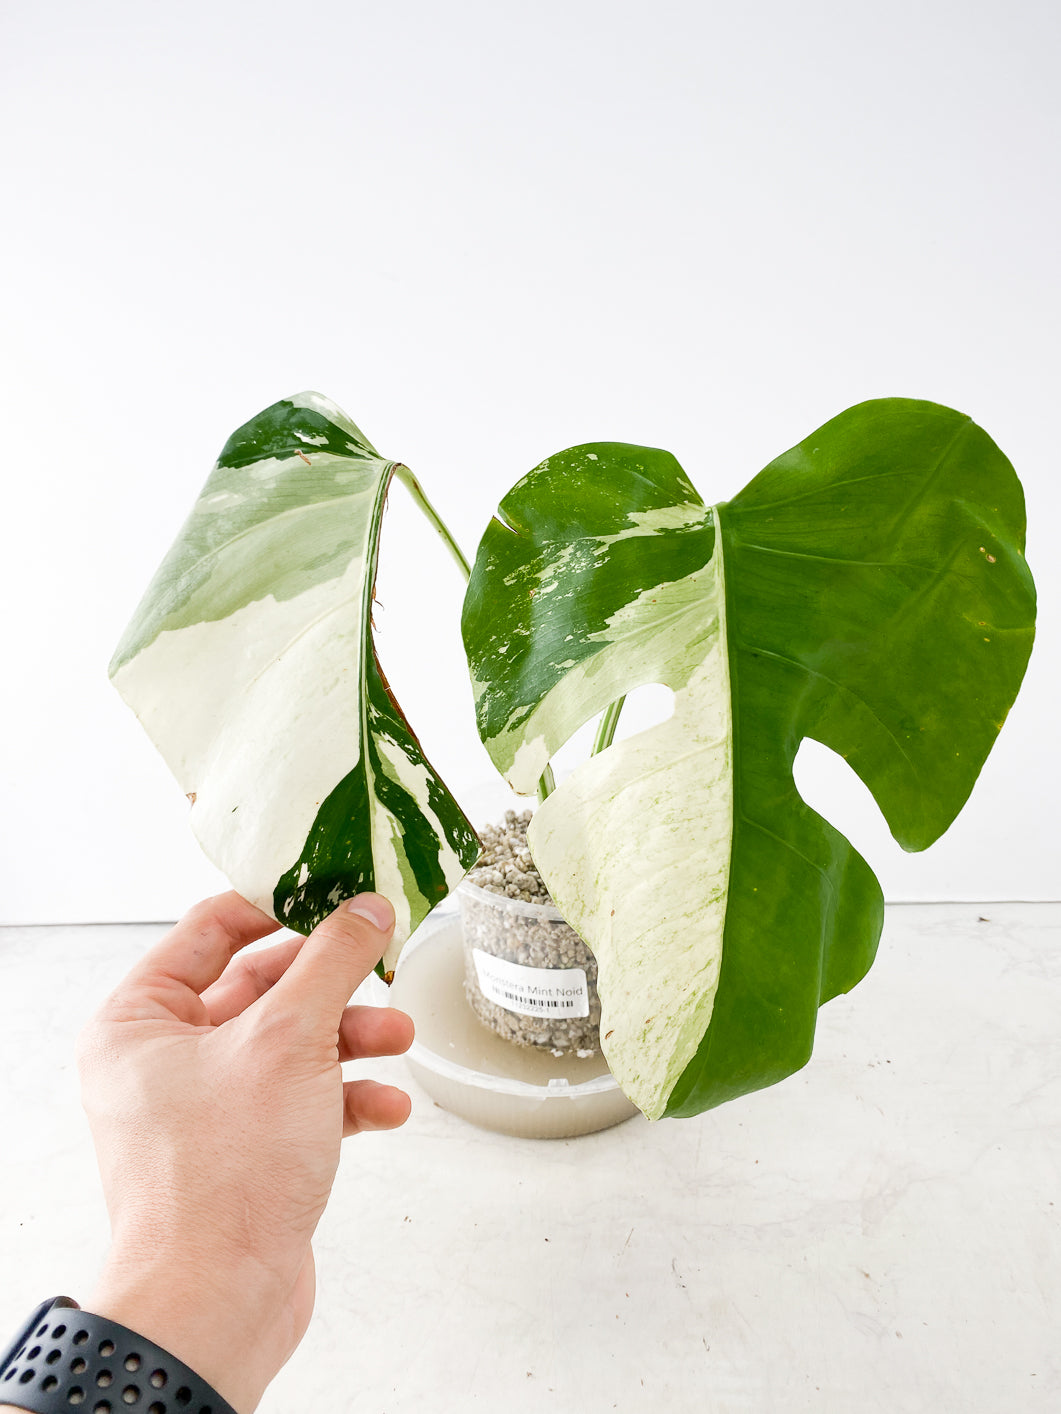 Monstera Mint Noid Slightly Rooted 2 leaves Top Cutting